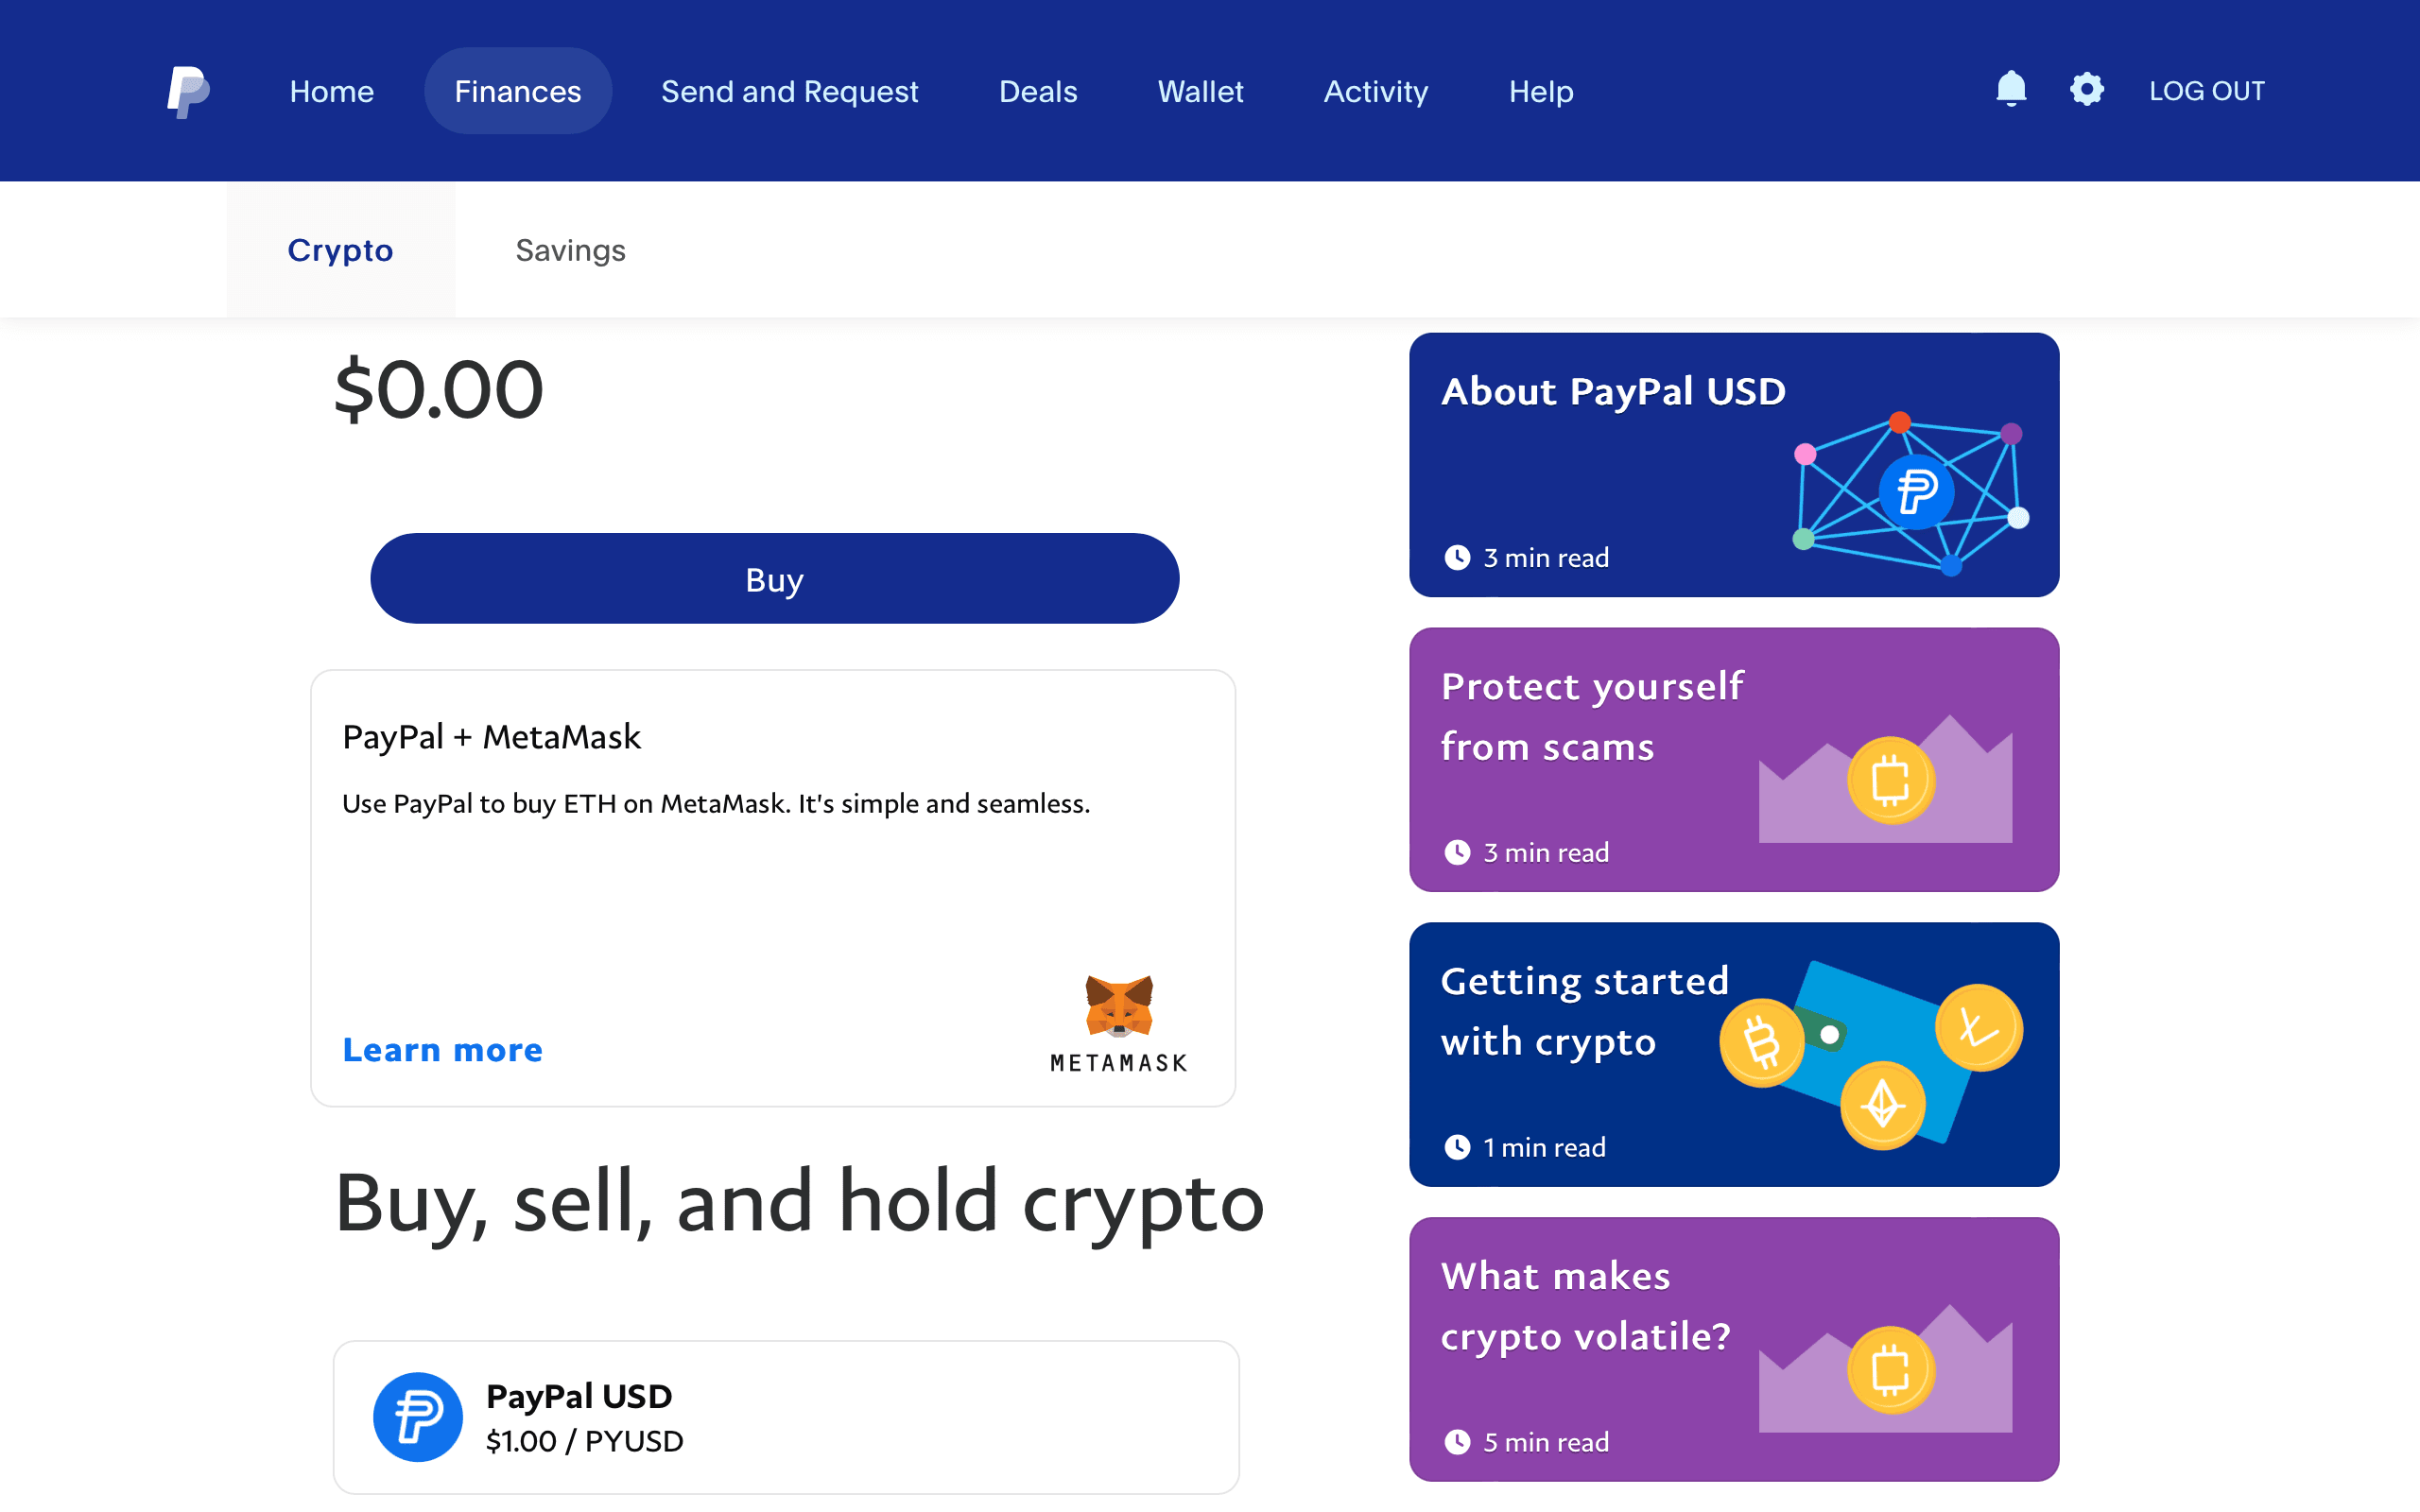 A screenshot showing PayPal's crypto section